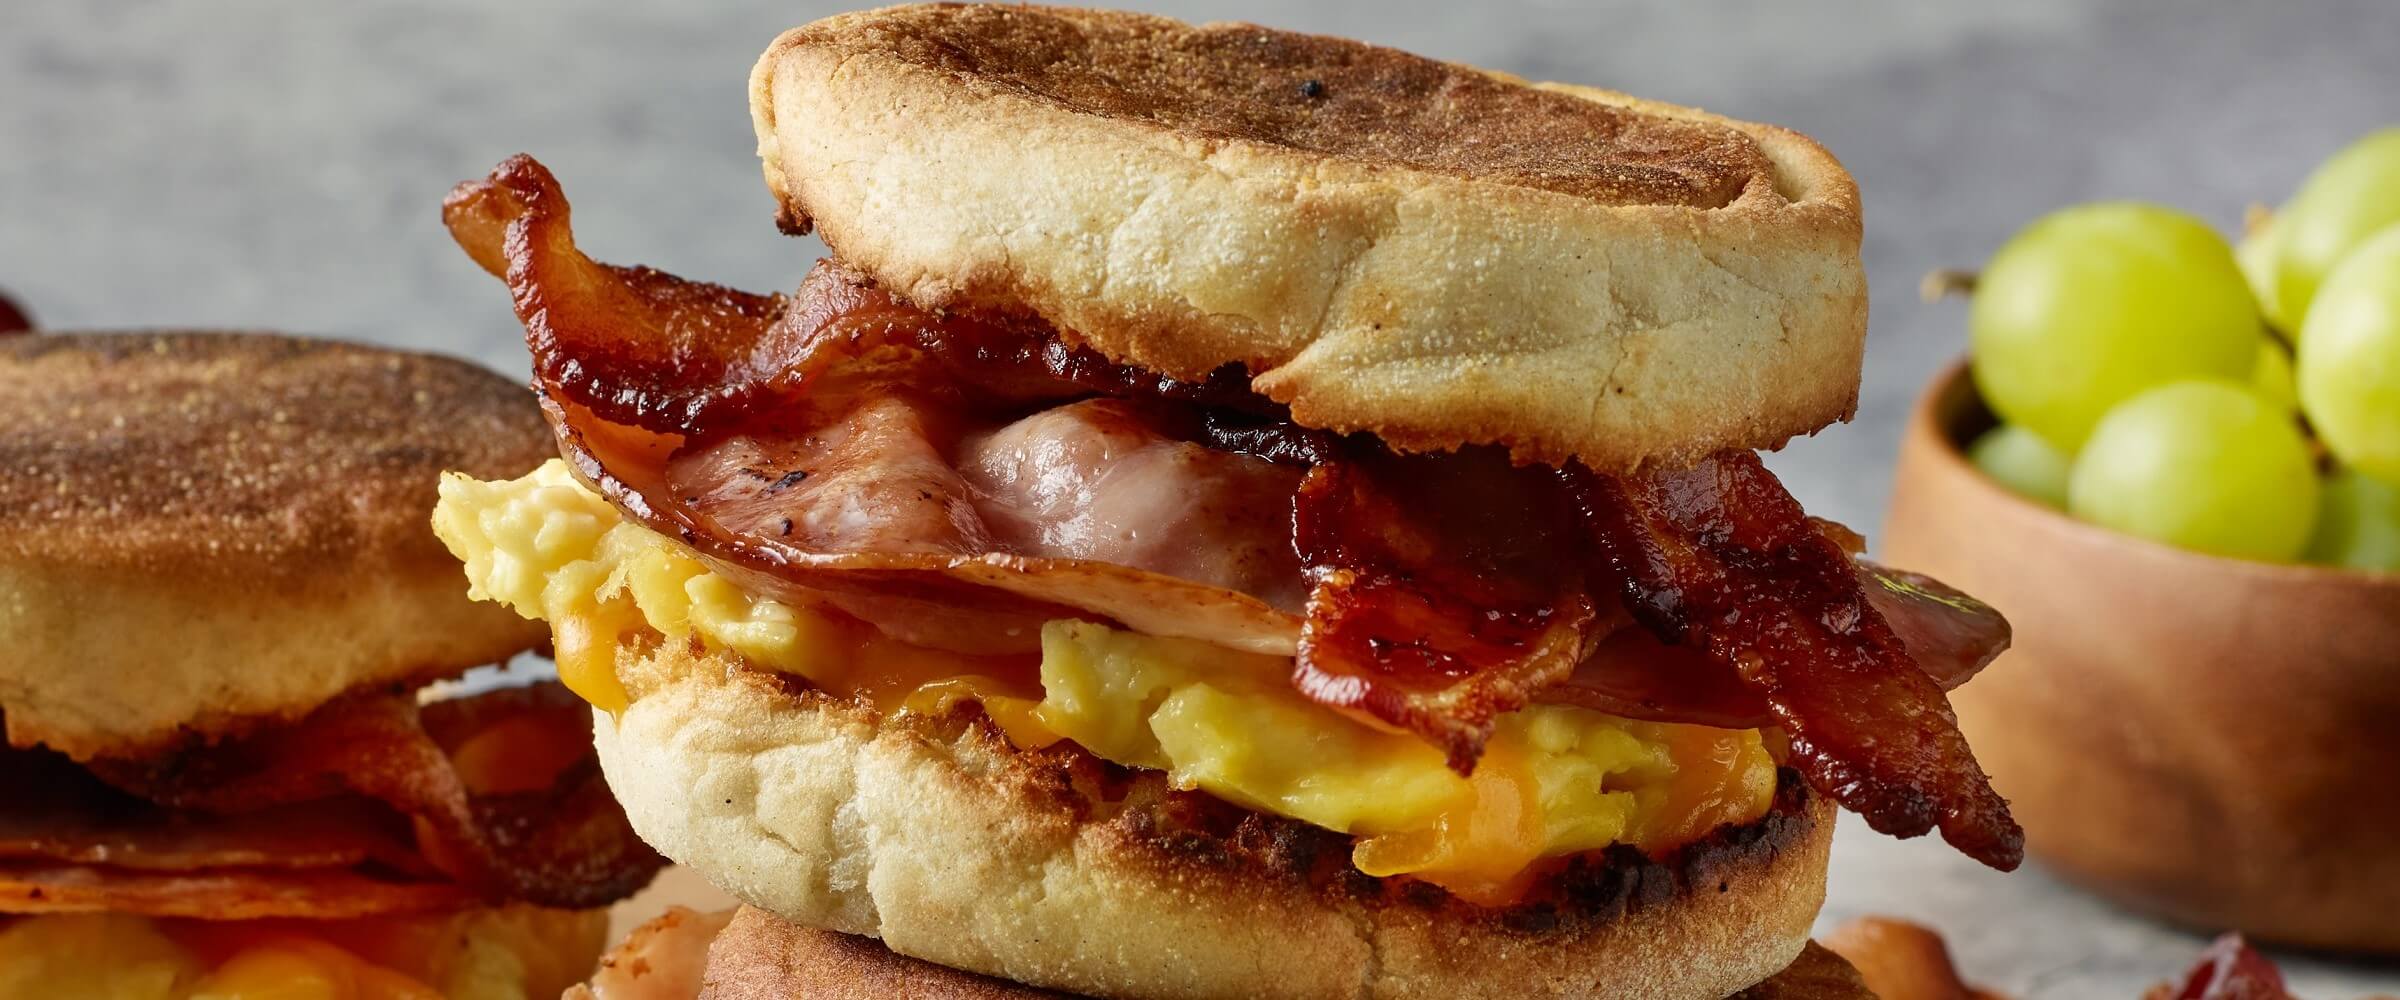 Ham and Bacon Breakfast Sandwich - HORMEL® NATURAL CHOICE® meats